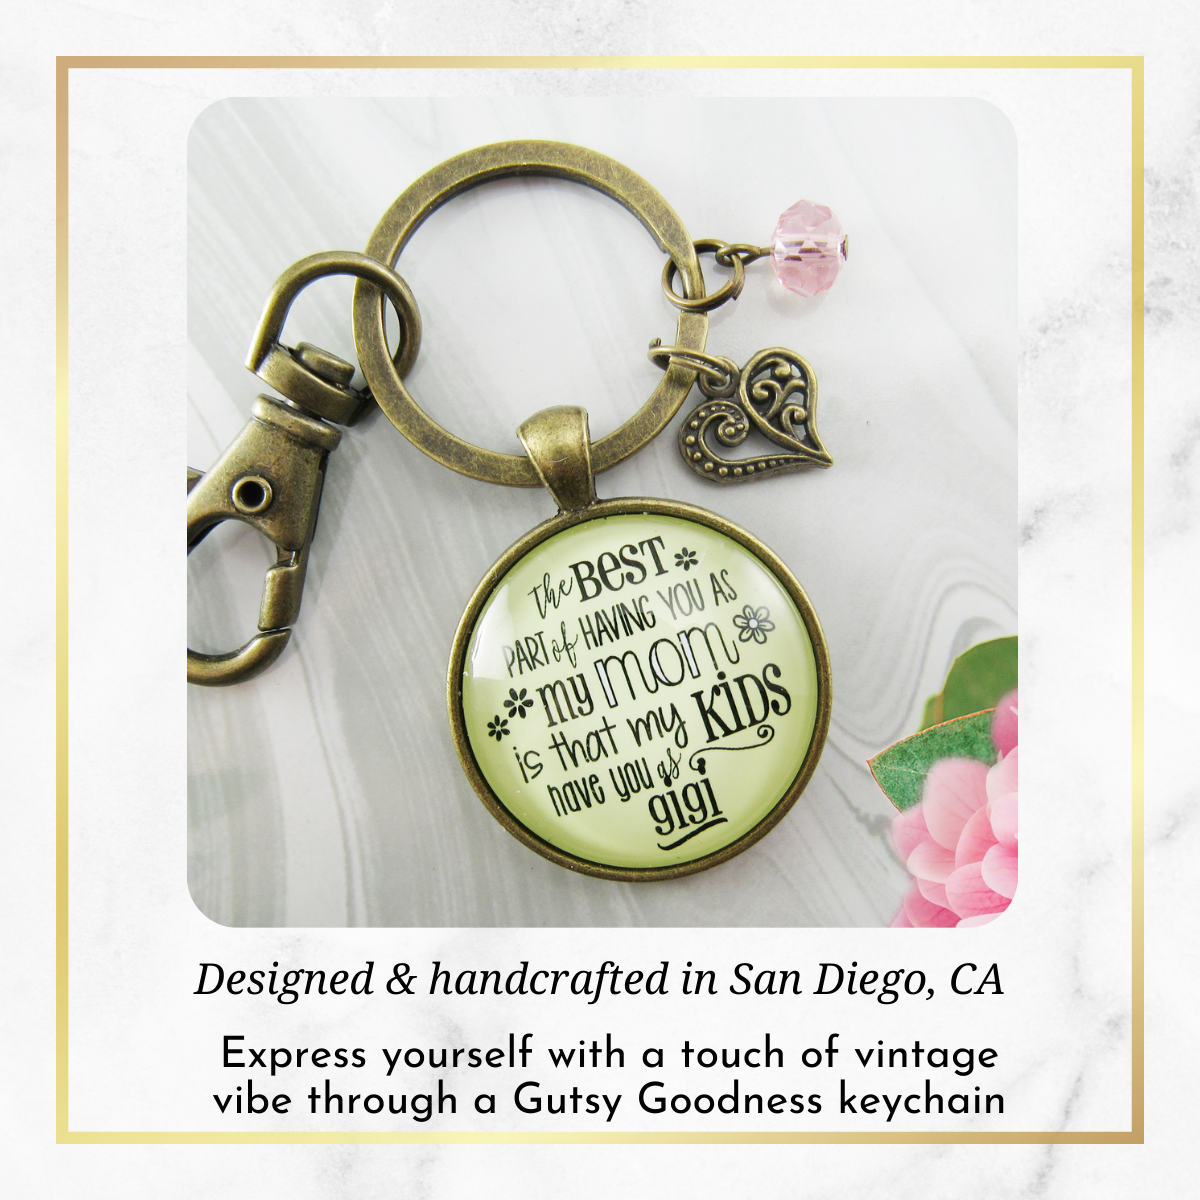 Gigi Keychain Best Part of Having You As Mom Kids Have Grandma Jewelry Gift From Daughter - Gutsy Goodness Handmade Jewelry;Gigi Keychain Best Part Of Having You As Mom Kids Have Grandma Jewelry Gift From Daughter - Gutsy Goodness Handmade Jewelry Gifts